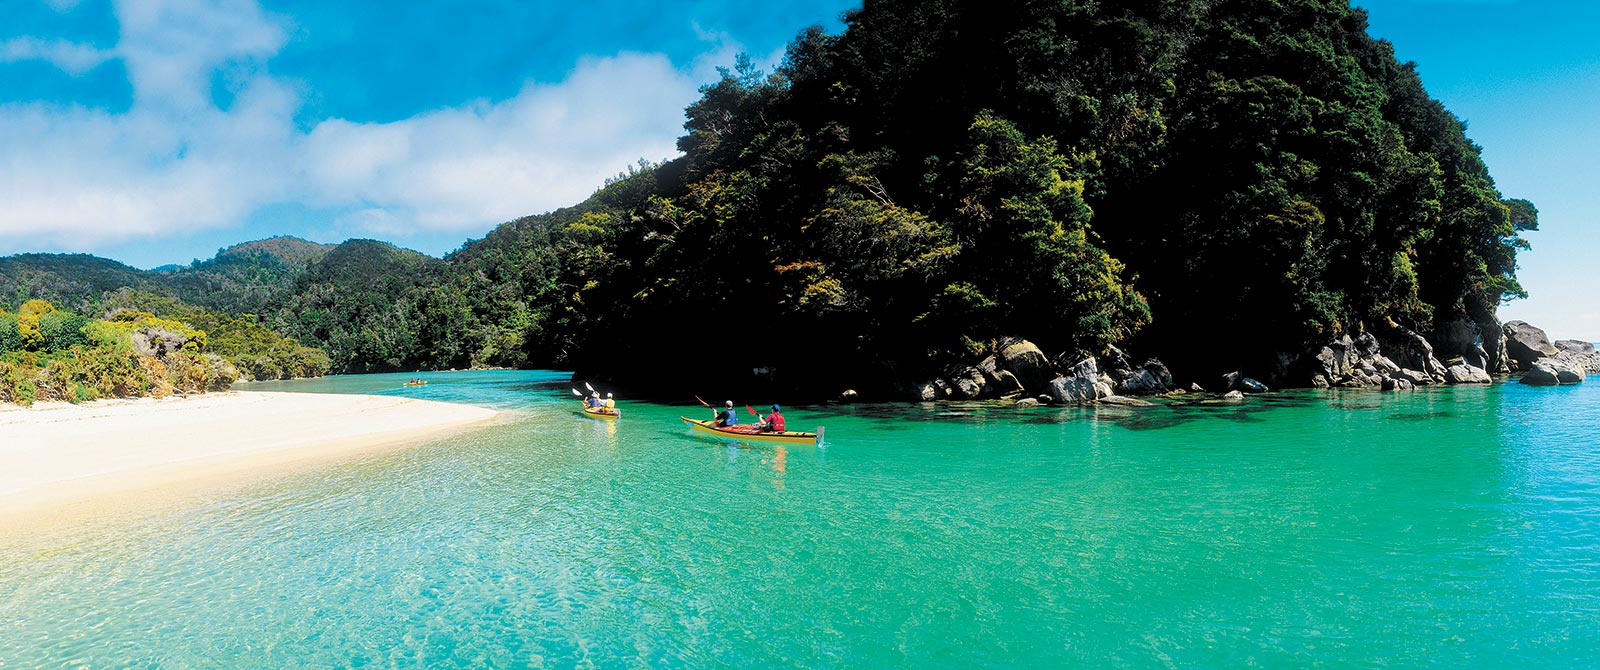 Sea Kayaking in Abel Tasman National Park - Book Your Trip to New Zealand - New Zealand Travel Agency